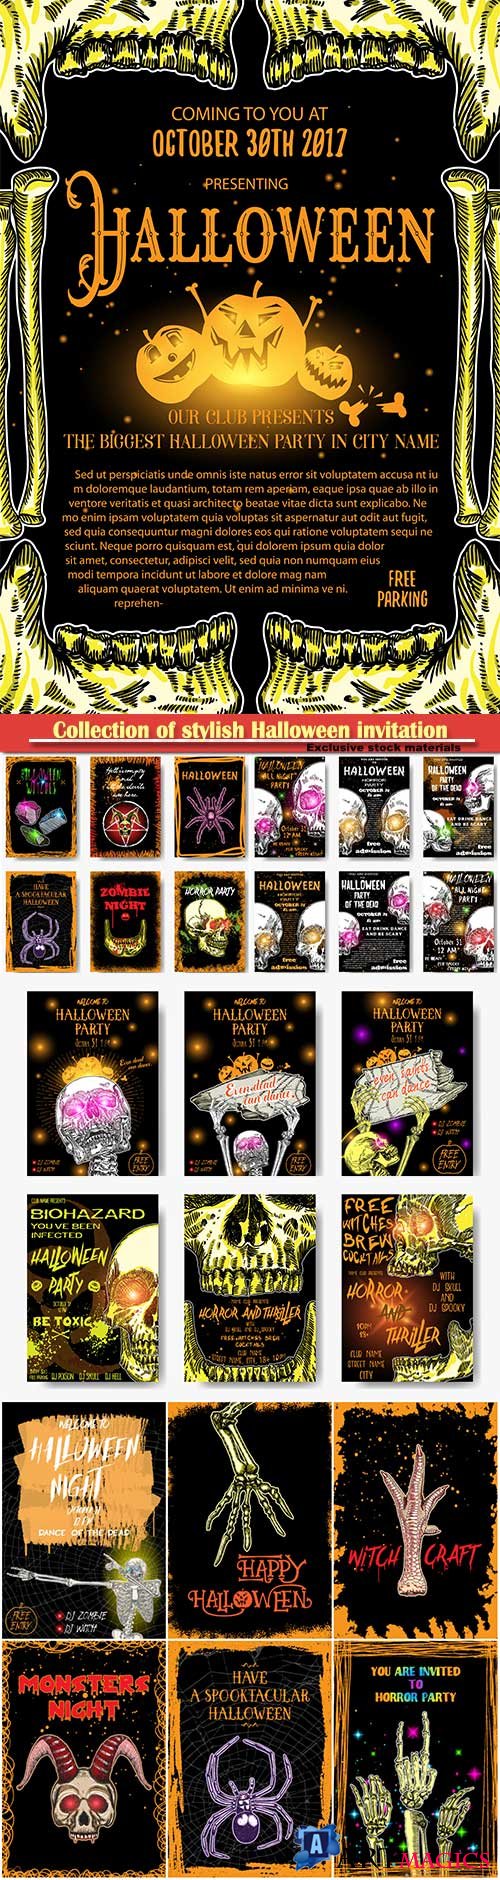 Collection of stylish Halloween invitation posters and cards, hand drawn Halloween greeting flayers templates